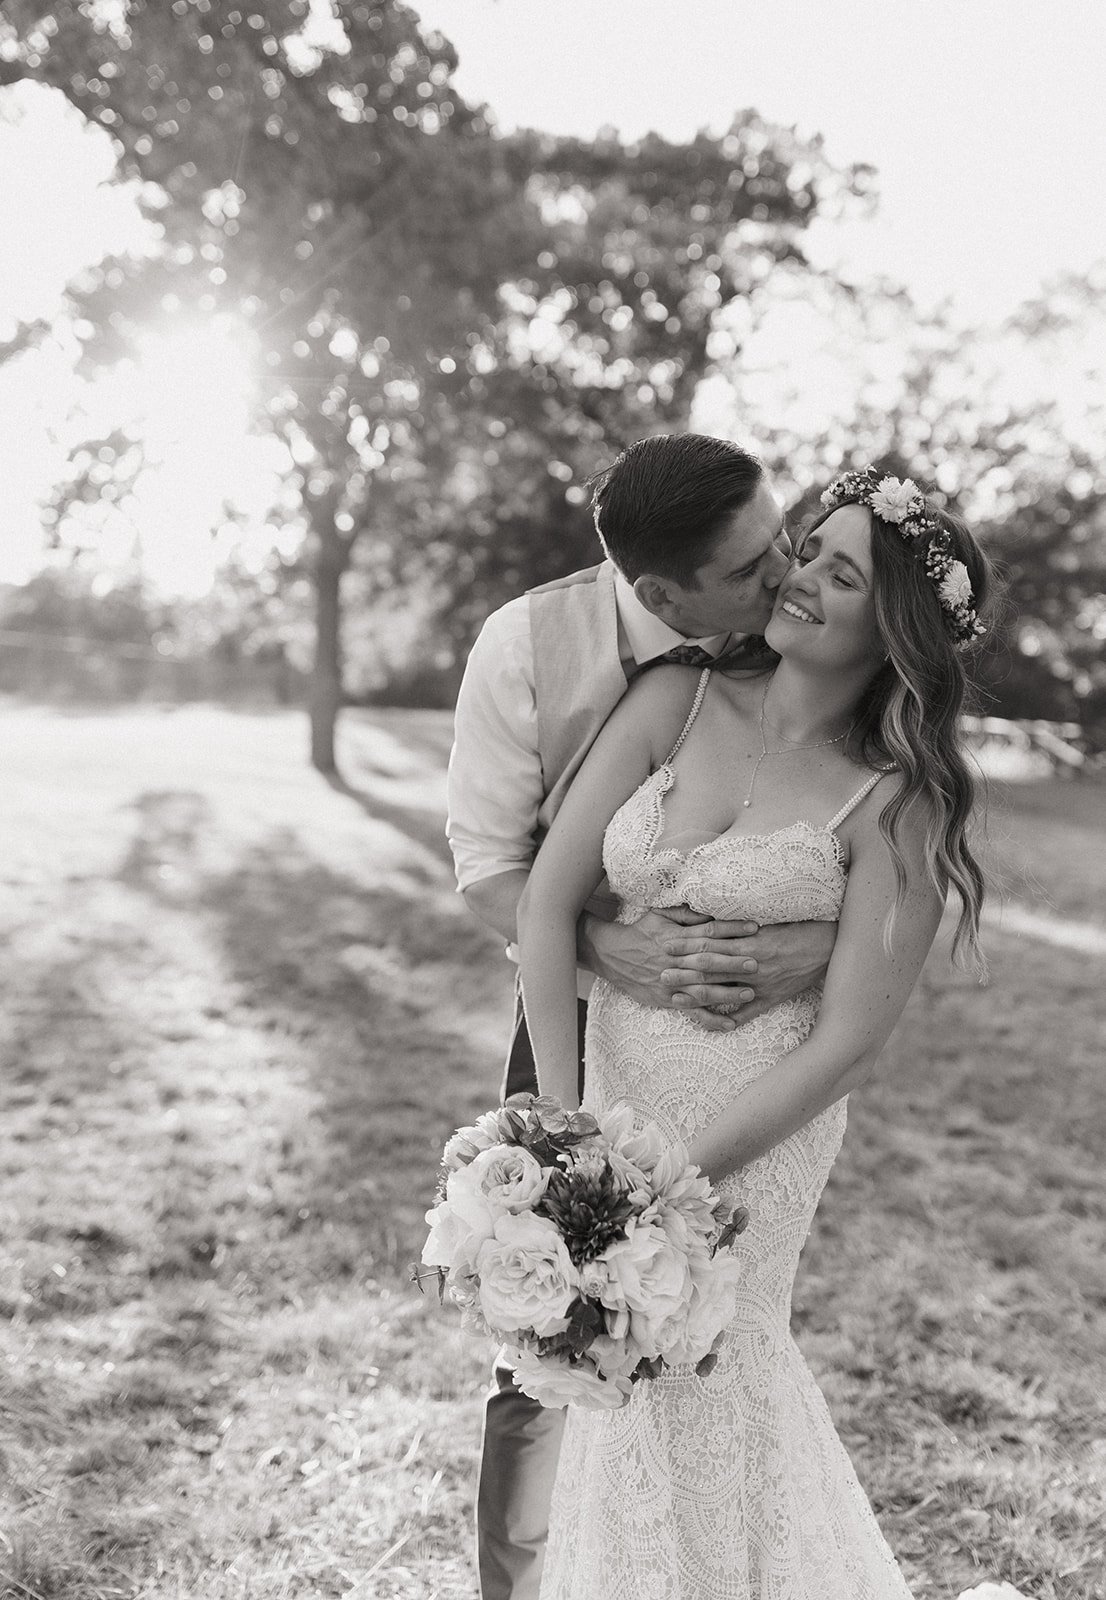 Emotive black and white photo of James kissing Leah on the cheek at golden hour 